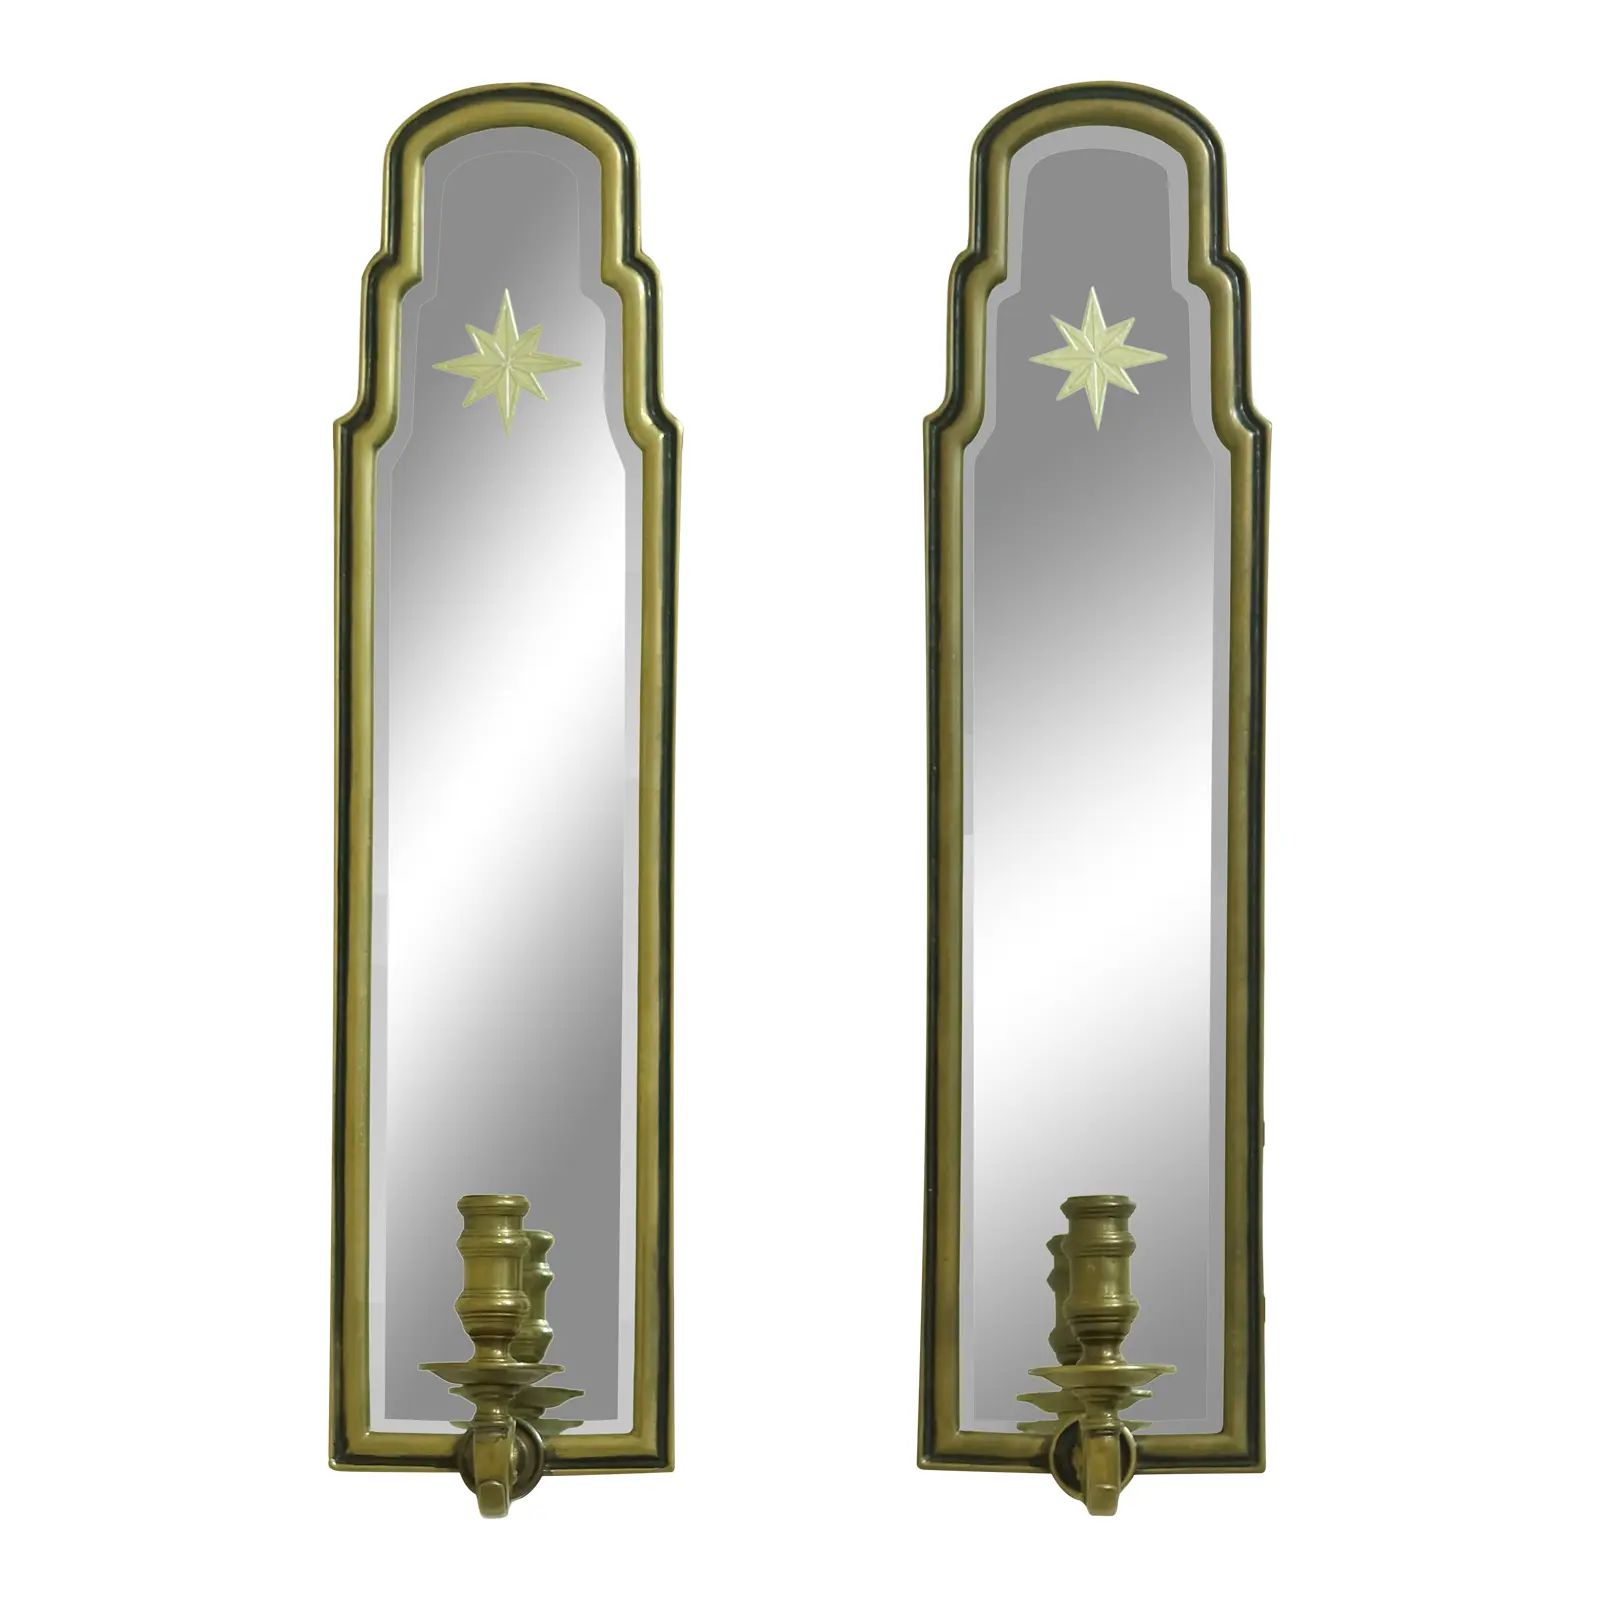 Regency Solid Brass Mirrored Candle Wall Sconces - a Pair | Chairish